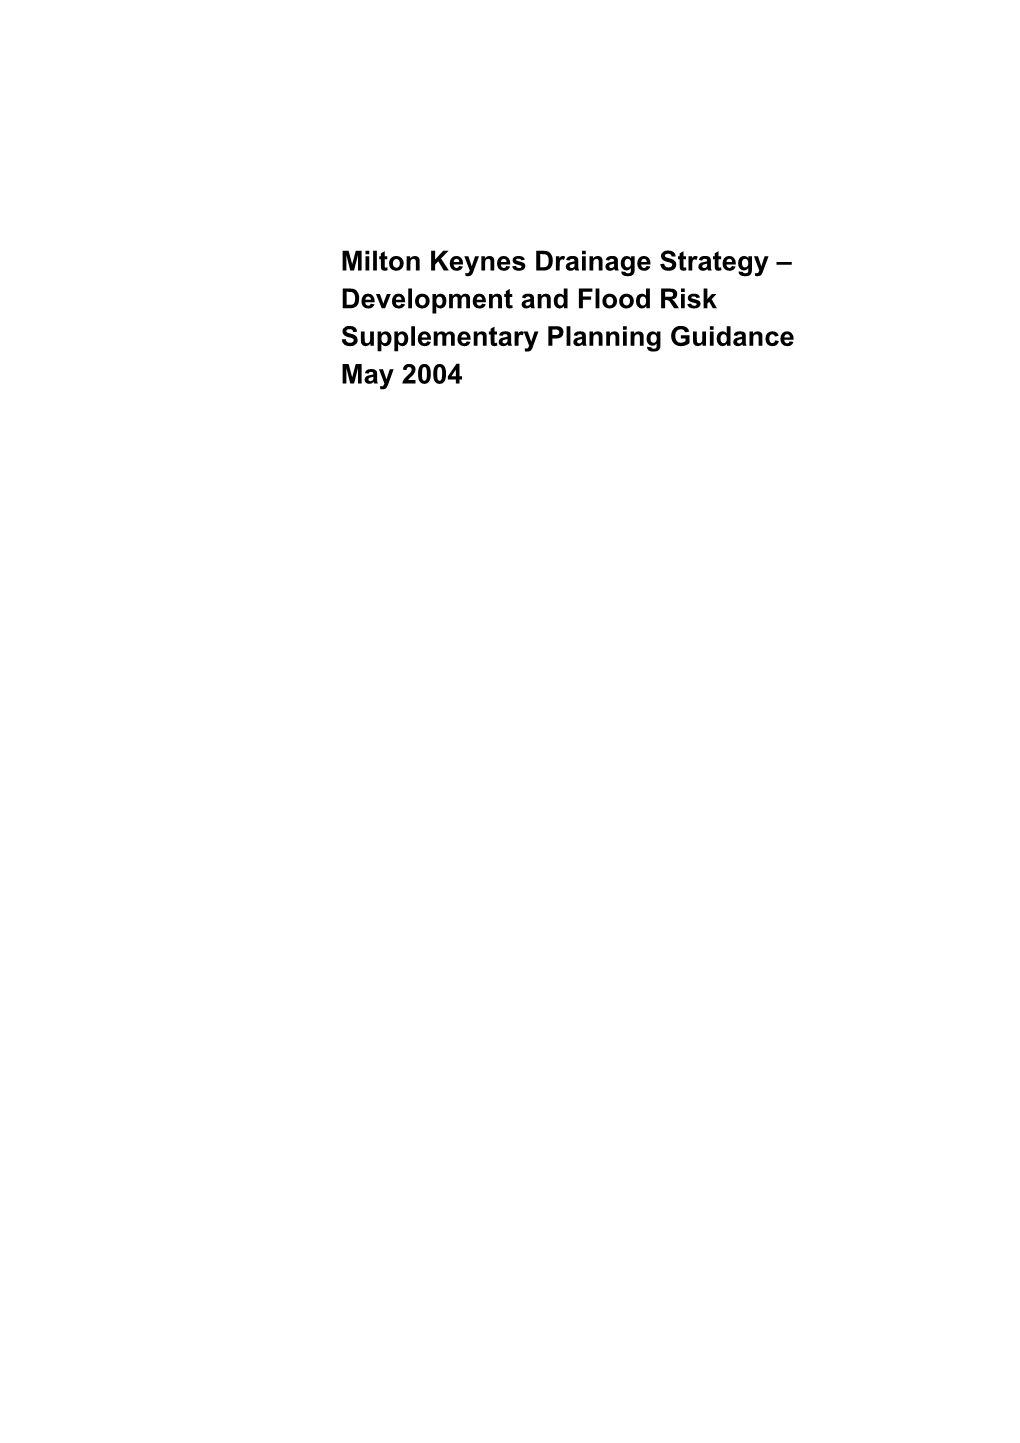 Milton Keynes Drainage Strategy – Development and Flood Risk Supplementary Planning Guidance May 2004